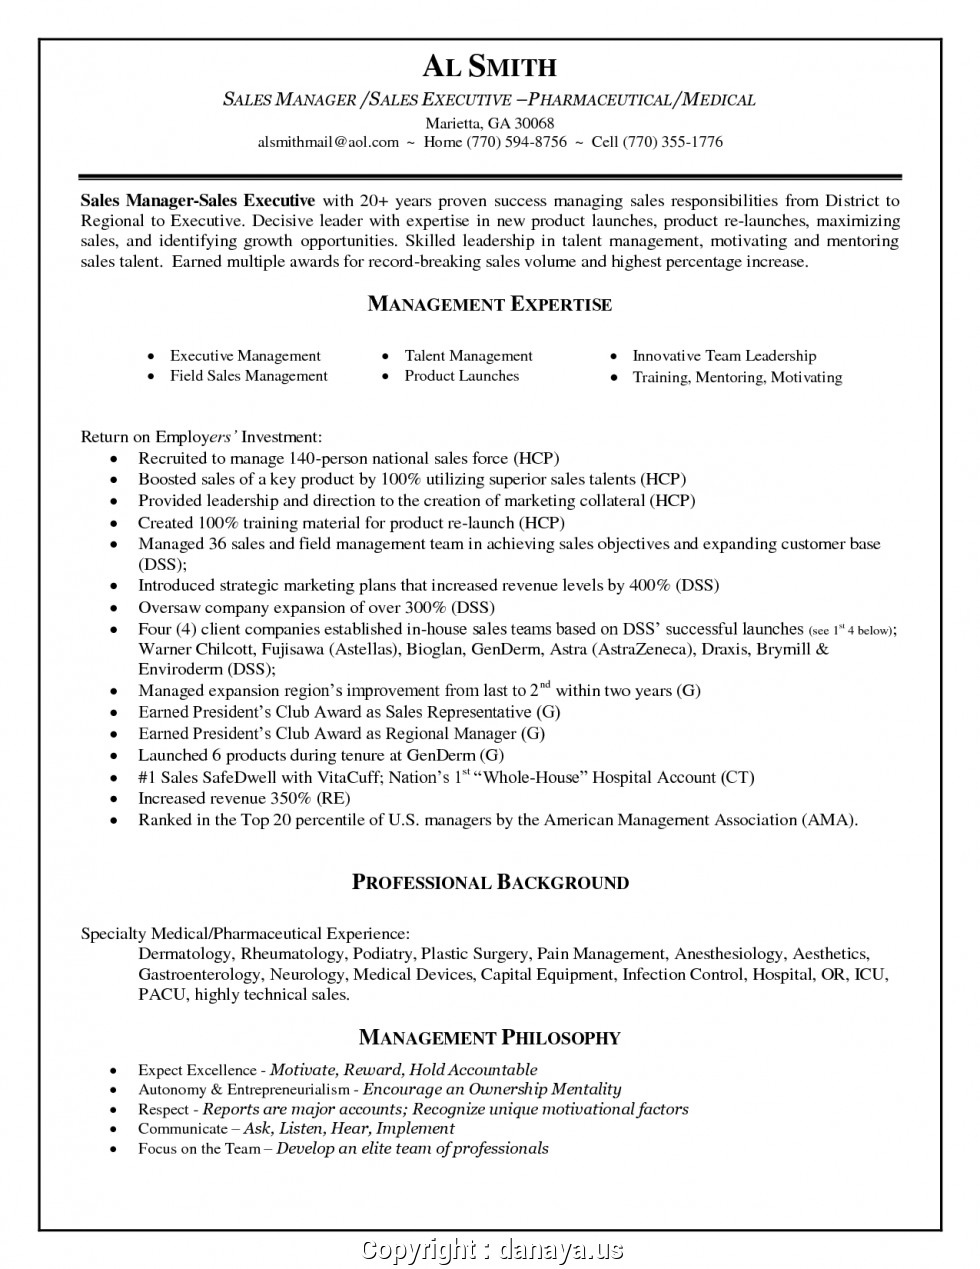 Sample Resume for area Sales Manager In Pharma Company Newest Pharmaceutical Sales Manager Resume Ultimate Sample